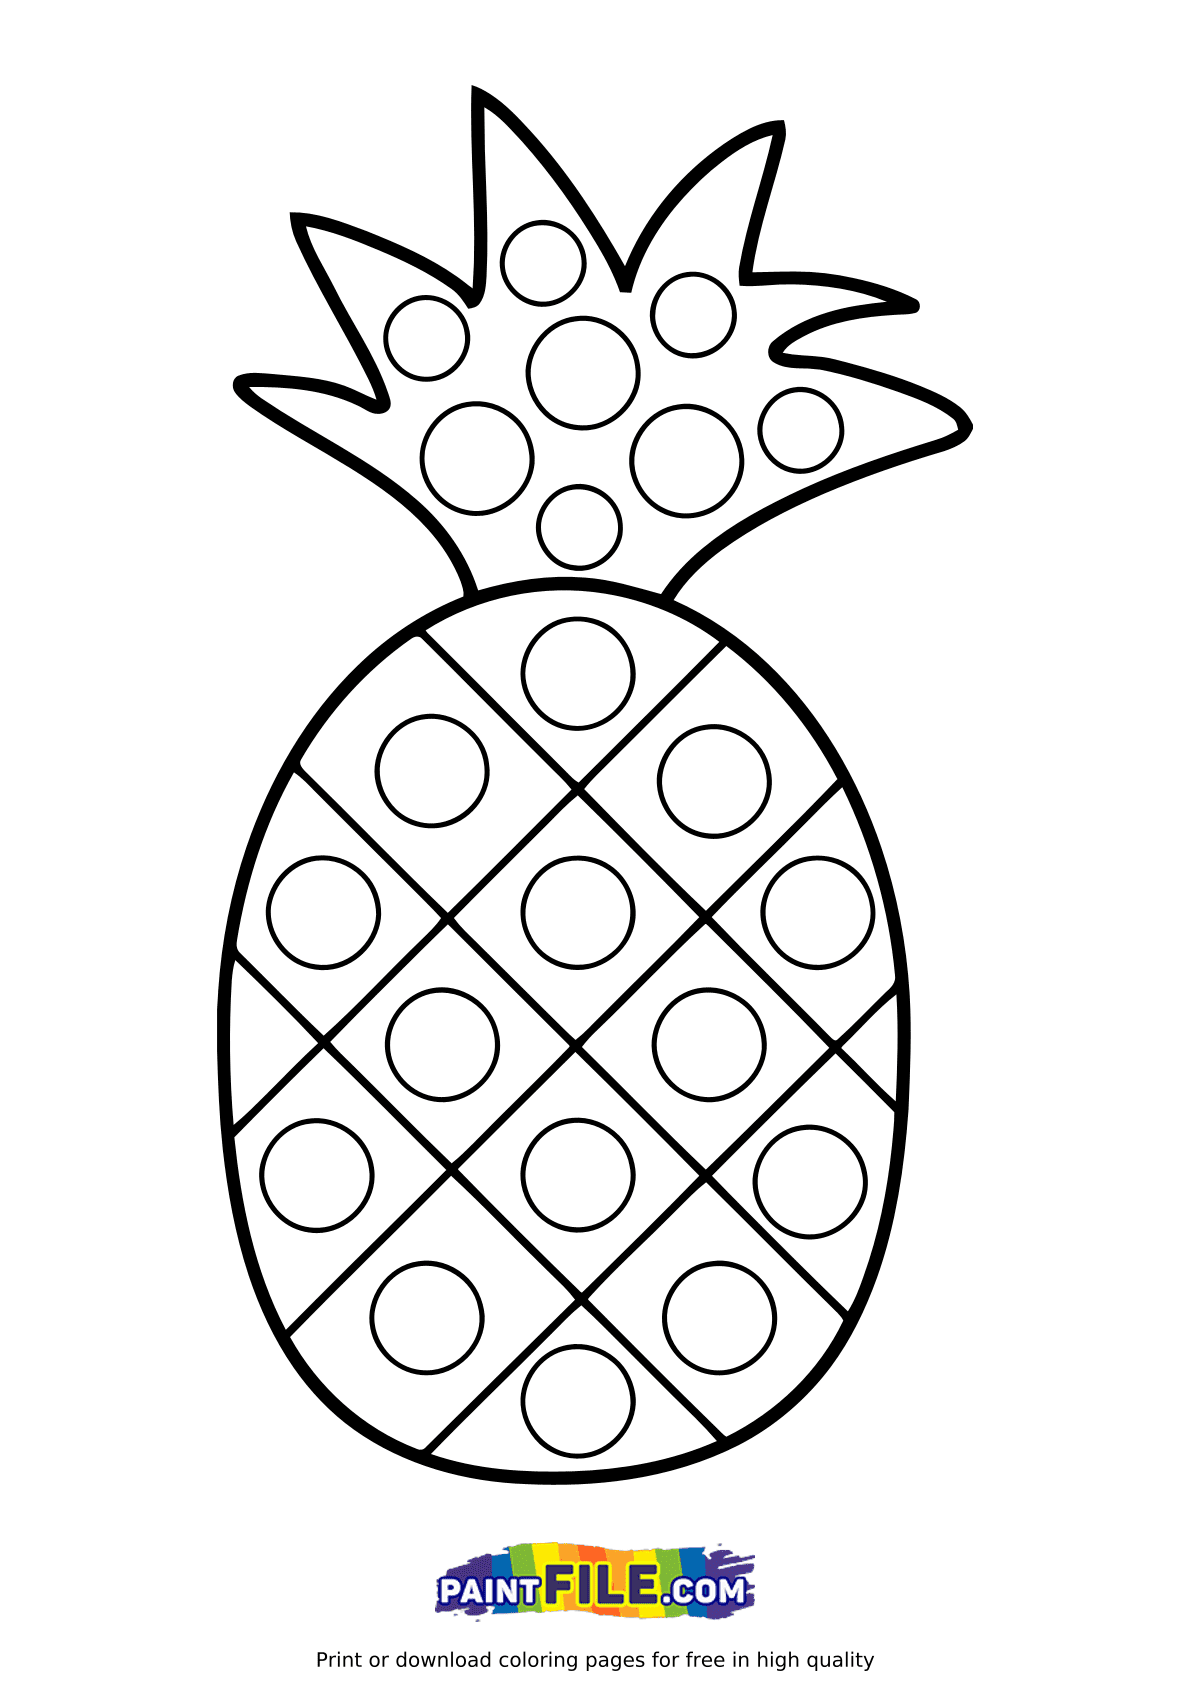 Pop it Yummy Pineapple Coloring Pages